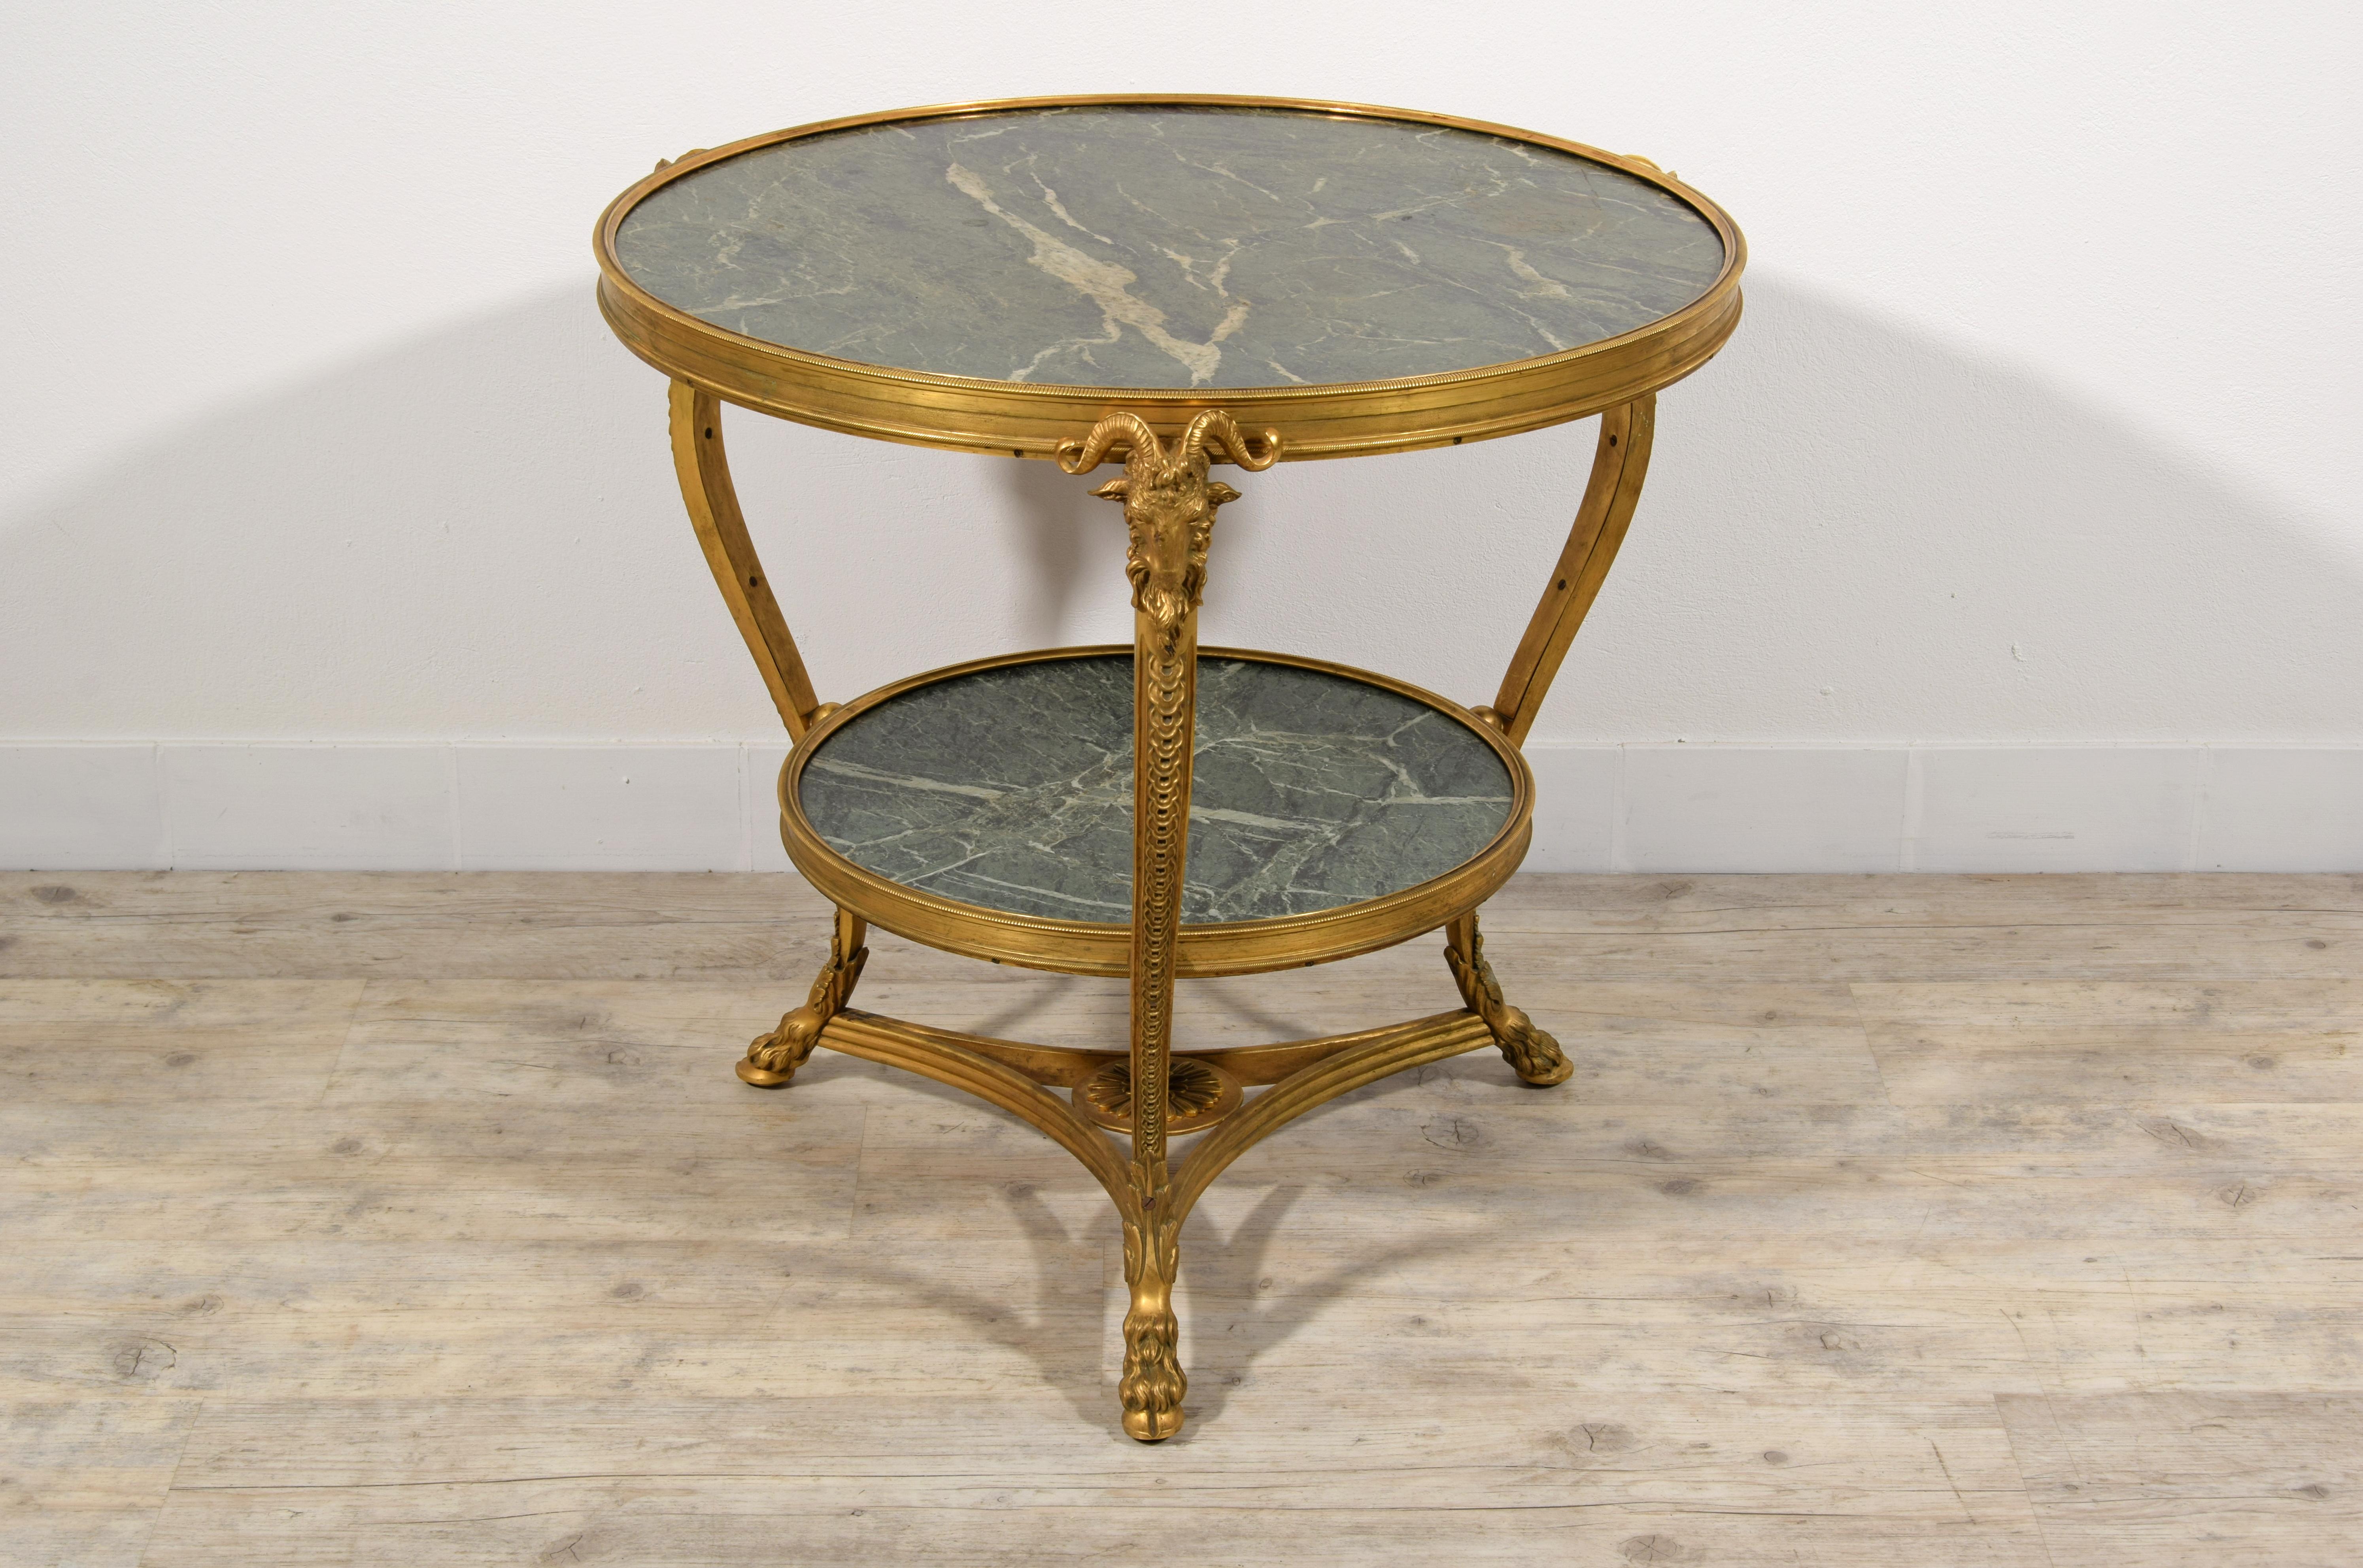 20th century, French gilt bronze coffee table with marble tops
This table was made in France between the end of the 19th century and the beginning of the 20th century. It consists of a gilded bronze structure finely chiselled with elements of